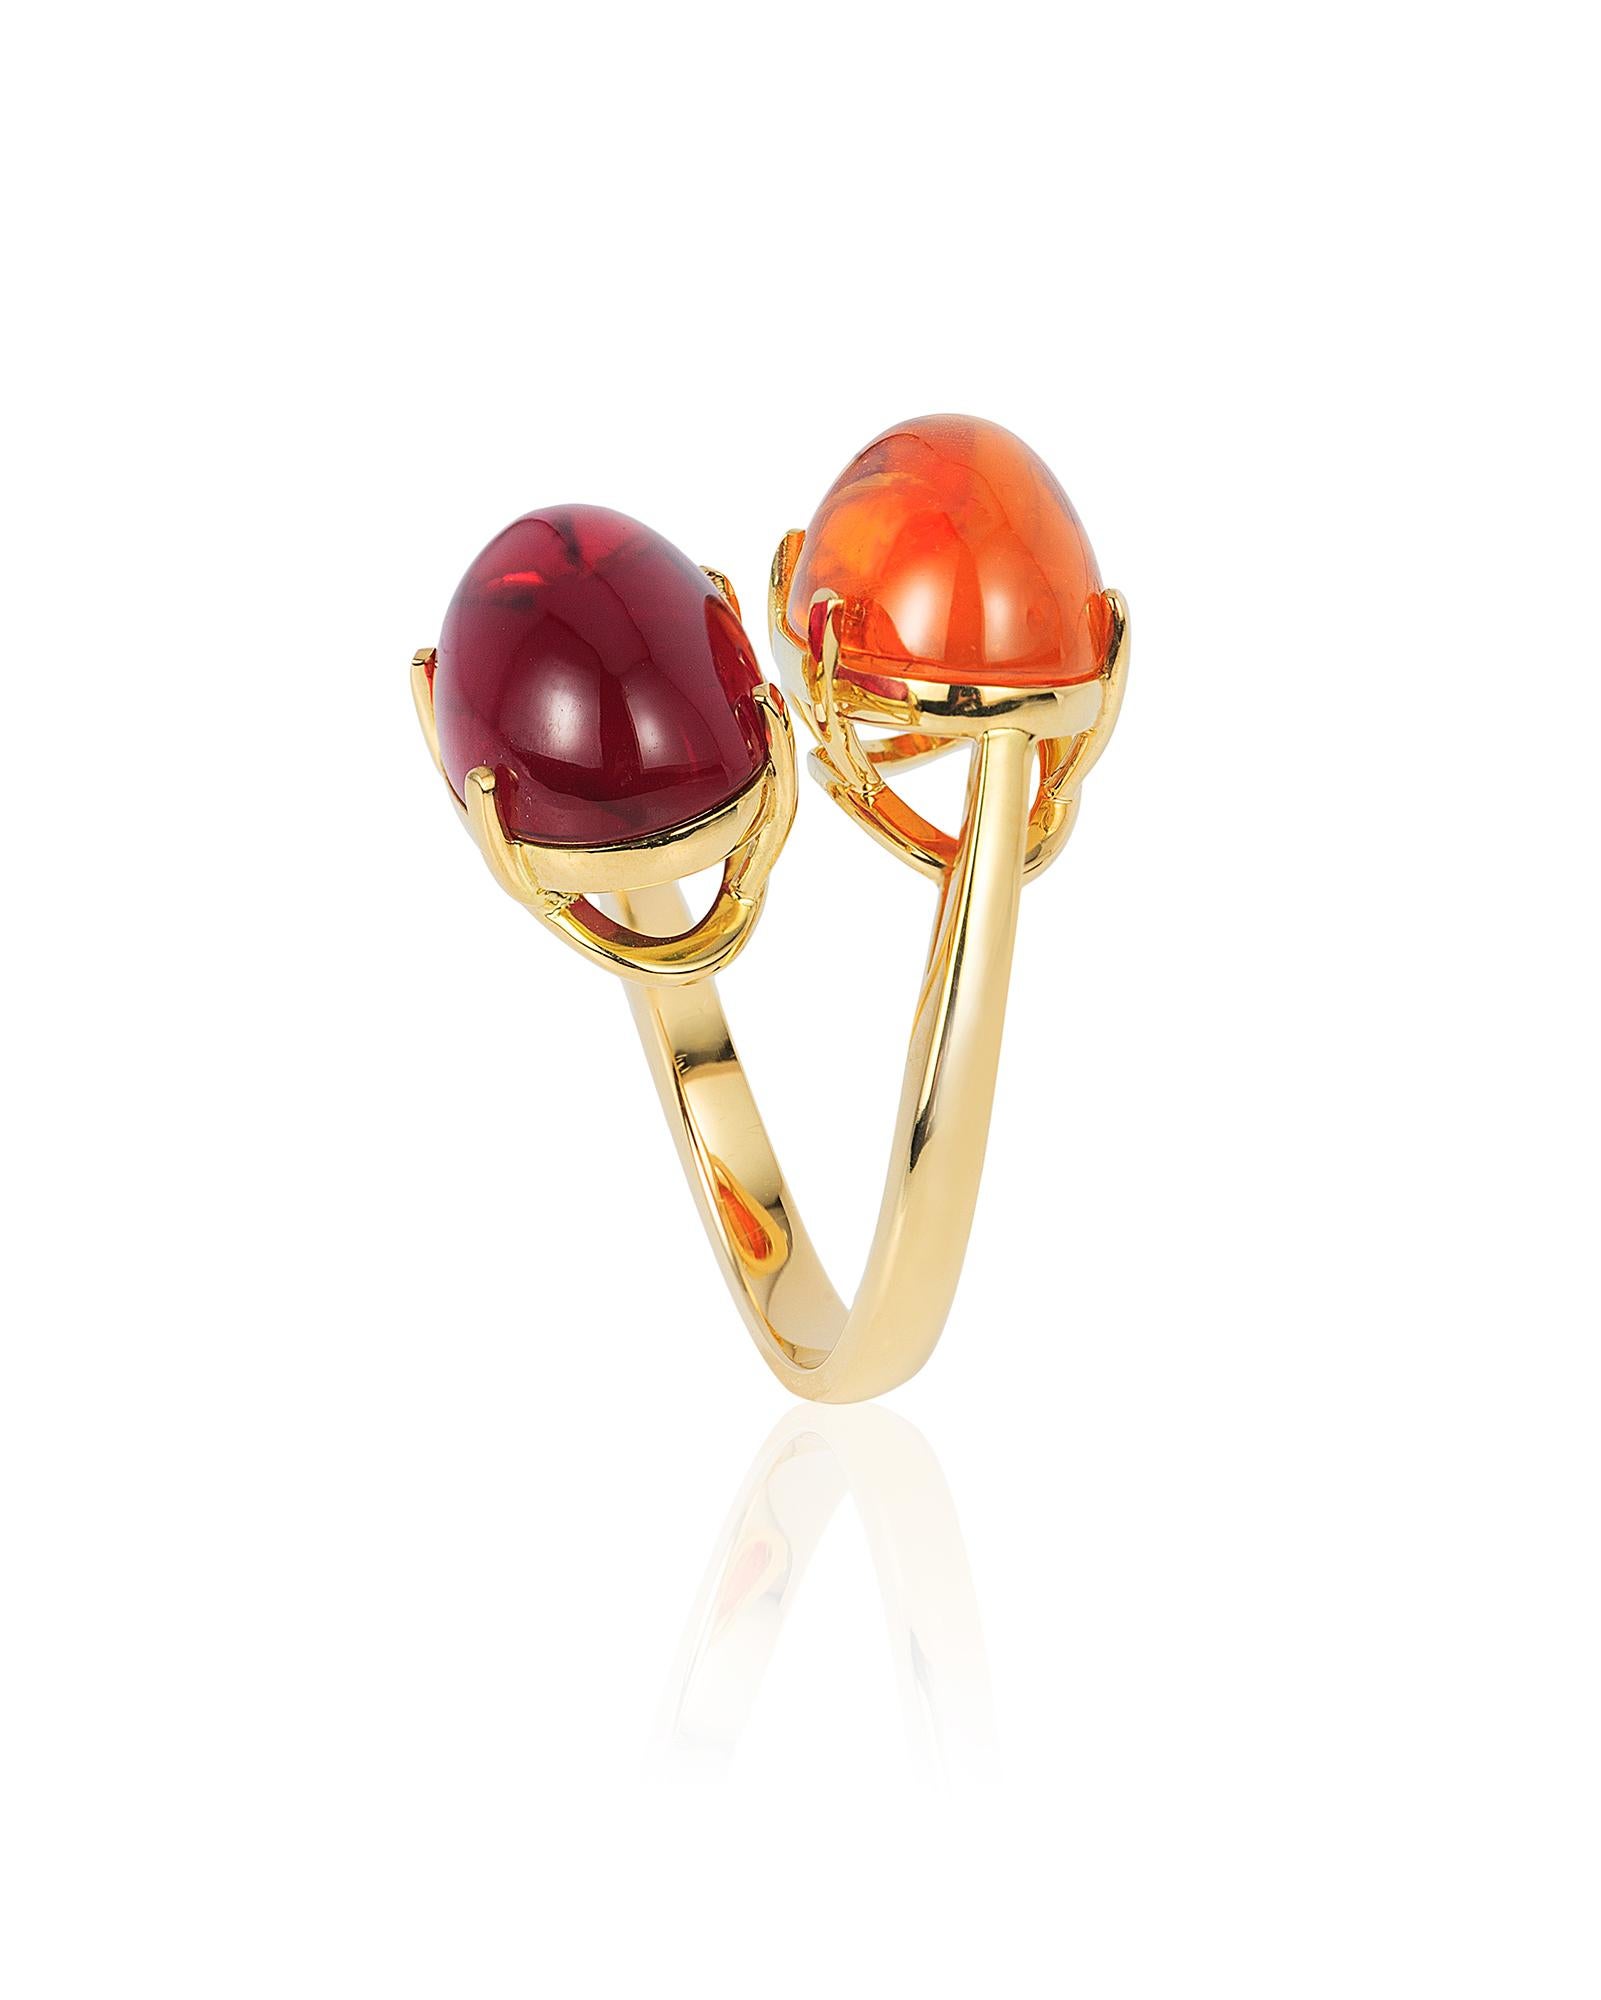 Mandarin Garnet & Rubelite Oval Cabochon Twin Ring in 18K Yellow Gold, from 'G-One' Collection

Stone Size: 16 x 10 mm 

Approx. Wt: 13.43 Carats (Mandarin Garnet), 10.11 Carats (Rubelite)
